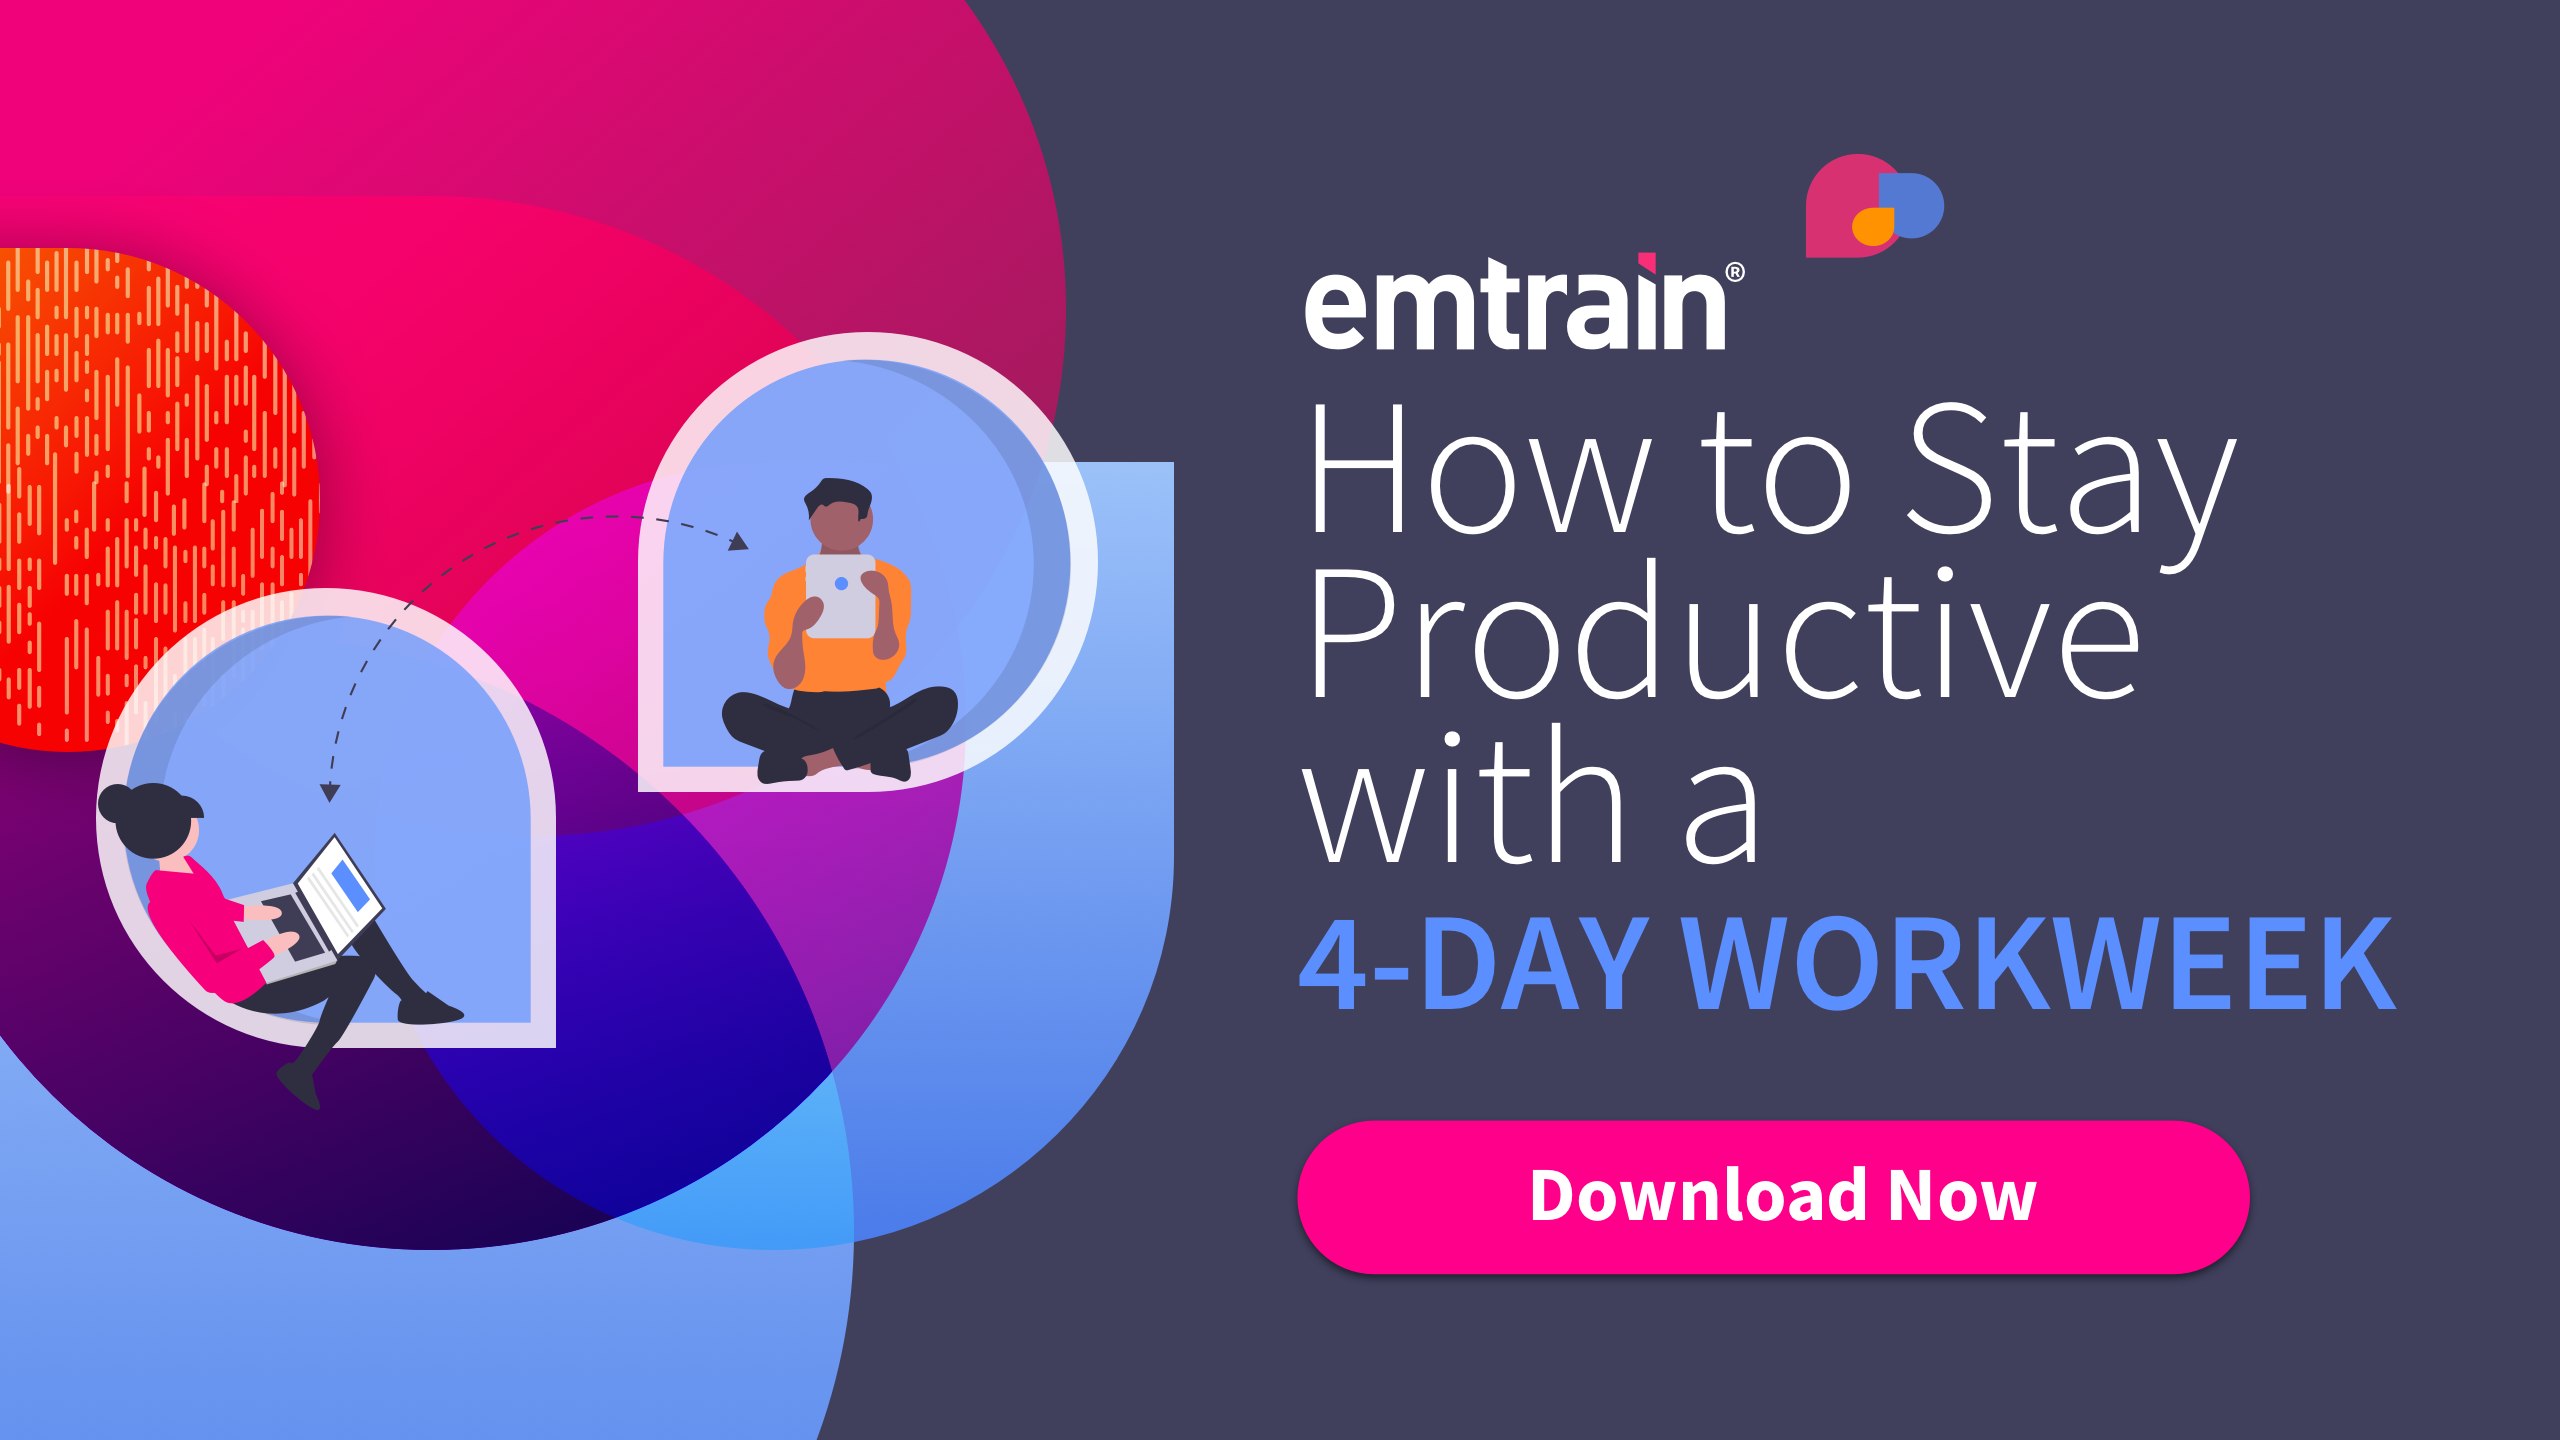 How to Stay Productive with a 4-Day Workweek